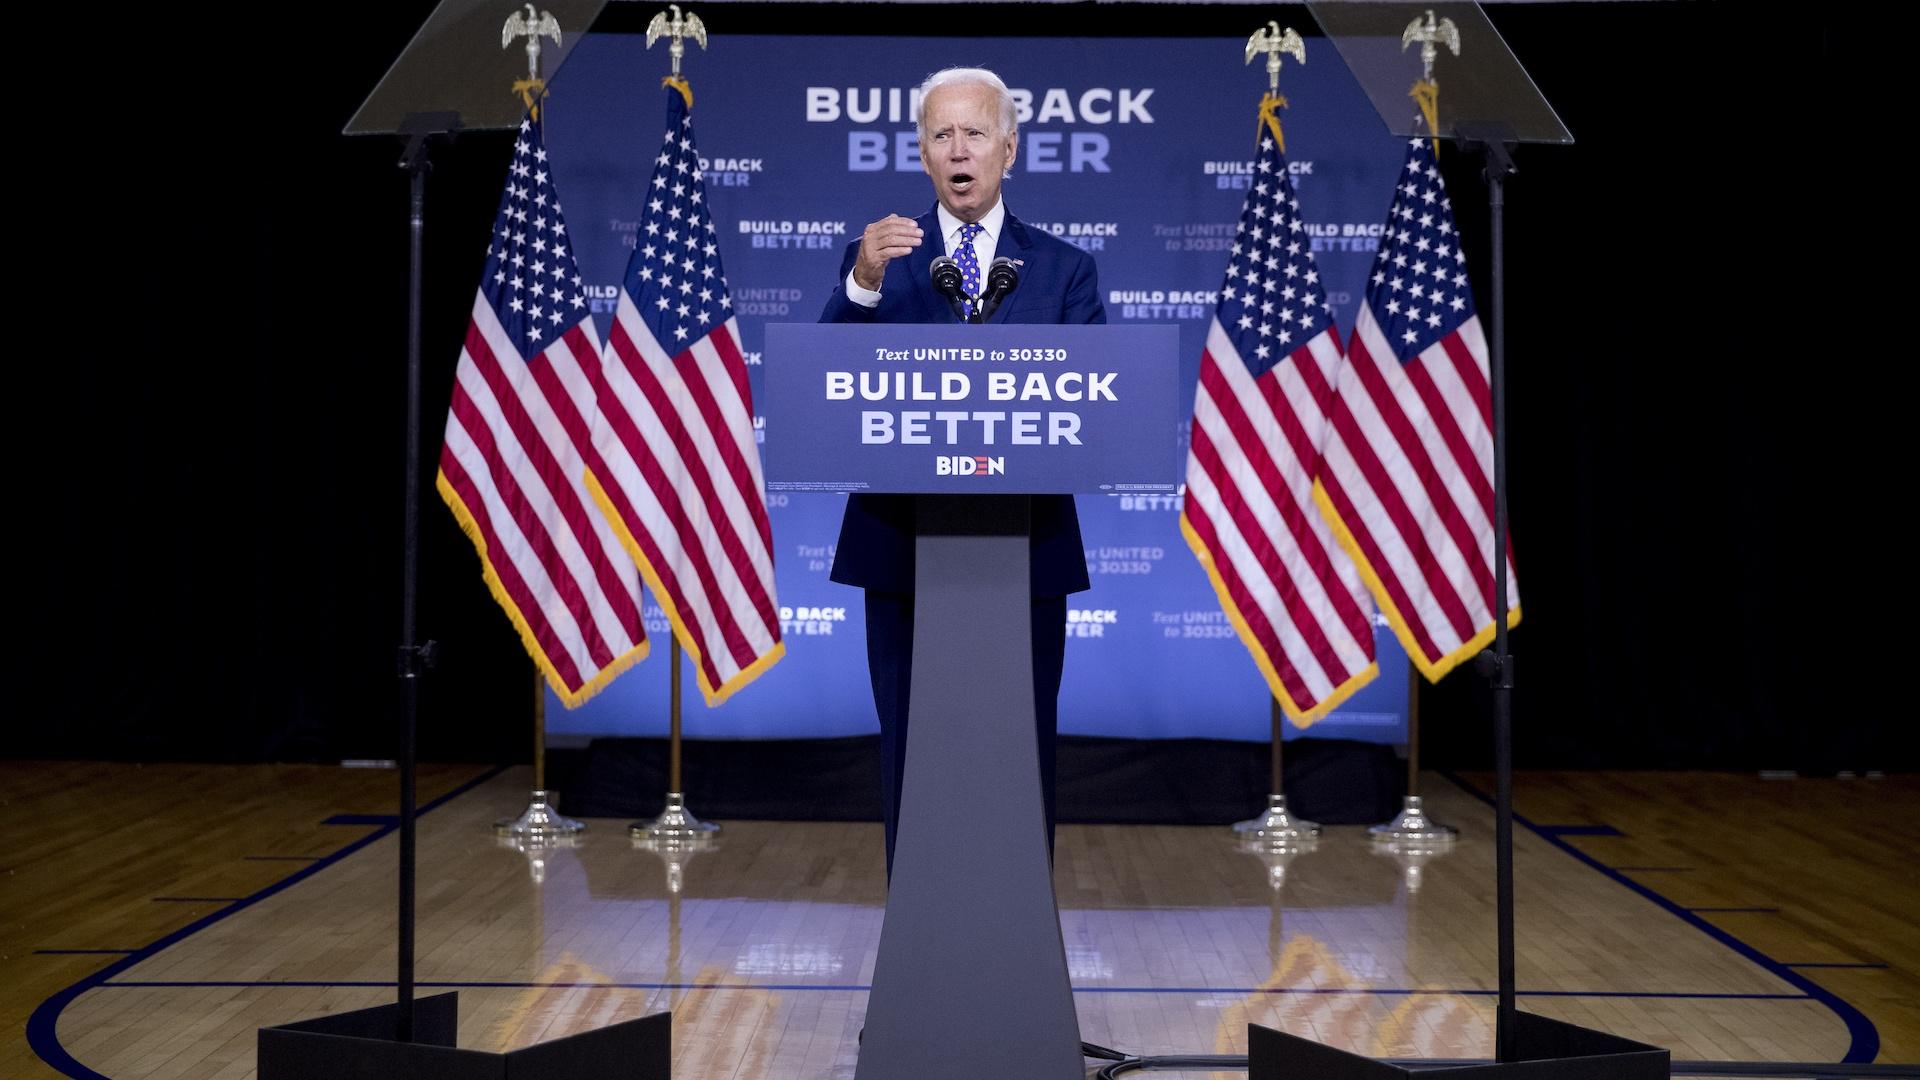 In this July 28, 2020, file photo, Democratic presidential candidate former Vice President Joe Biden speaks at a campaign event at the William "Hicks" Anderson Community Center in Wilmington, Del. (AP Photo/Andrew Harnik, File)